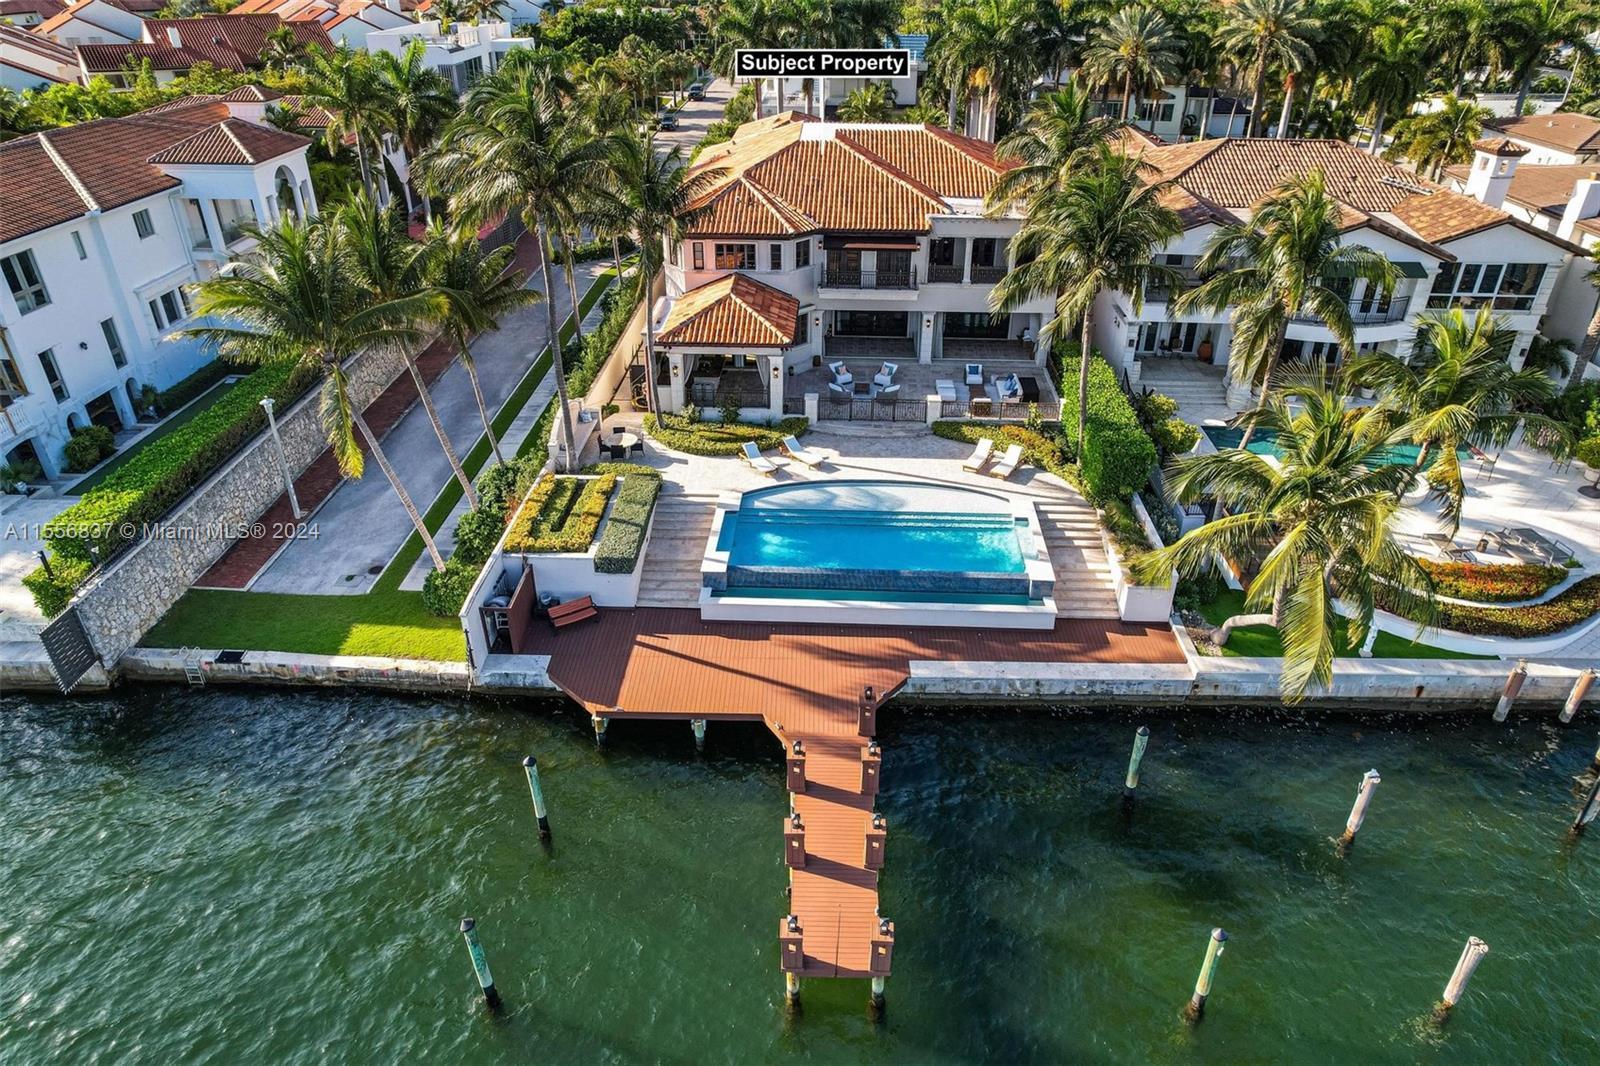 Spectacular Mediterranean home with incredible unobstructed views of Biscayne Bay. This 2-story wate